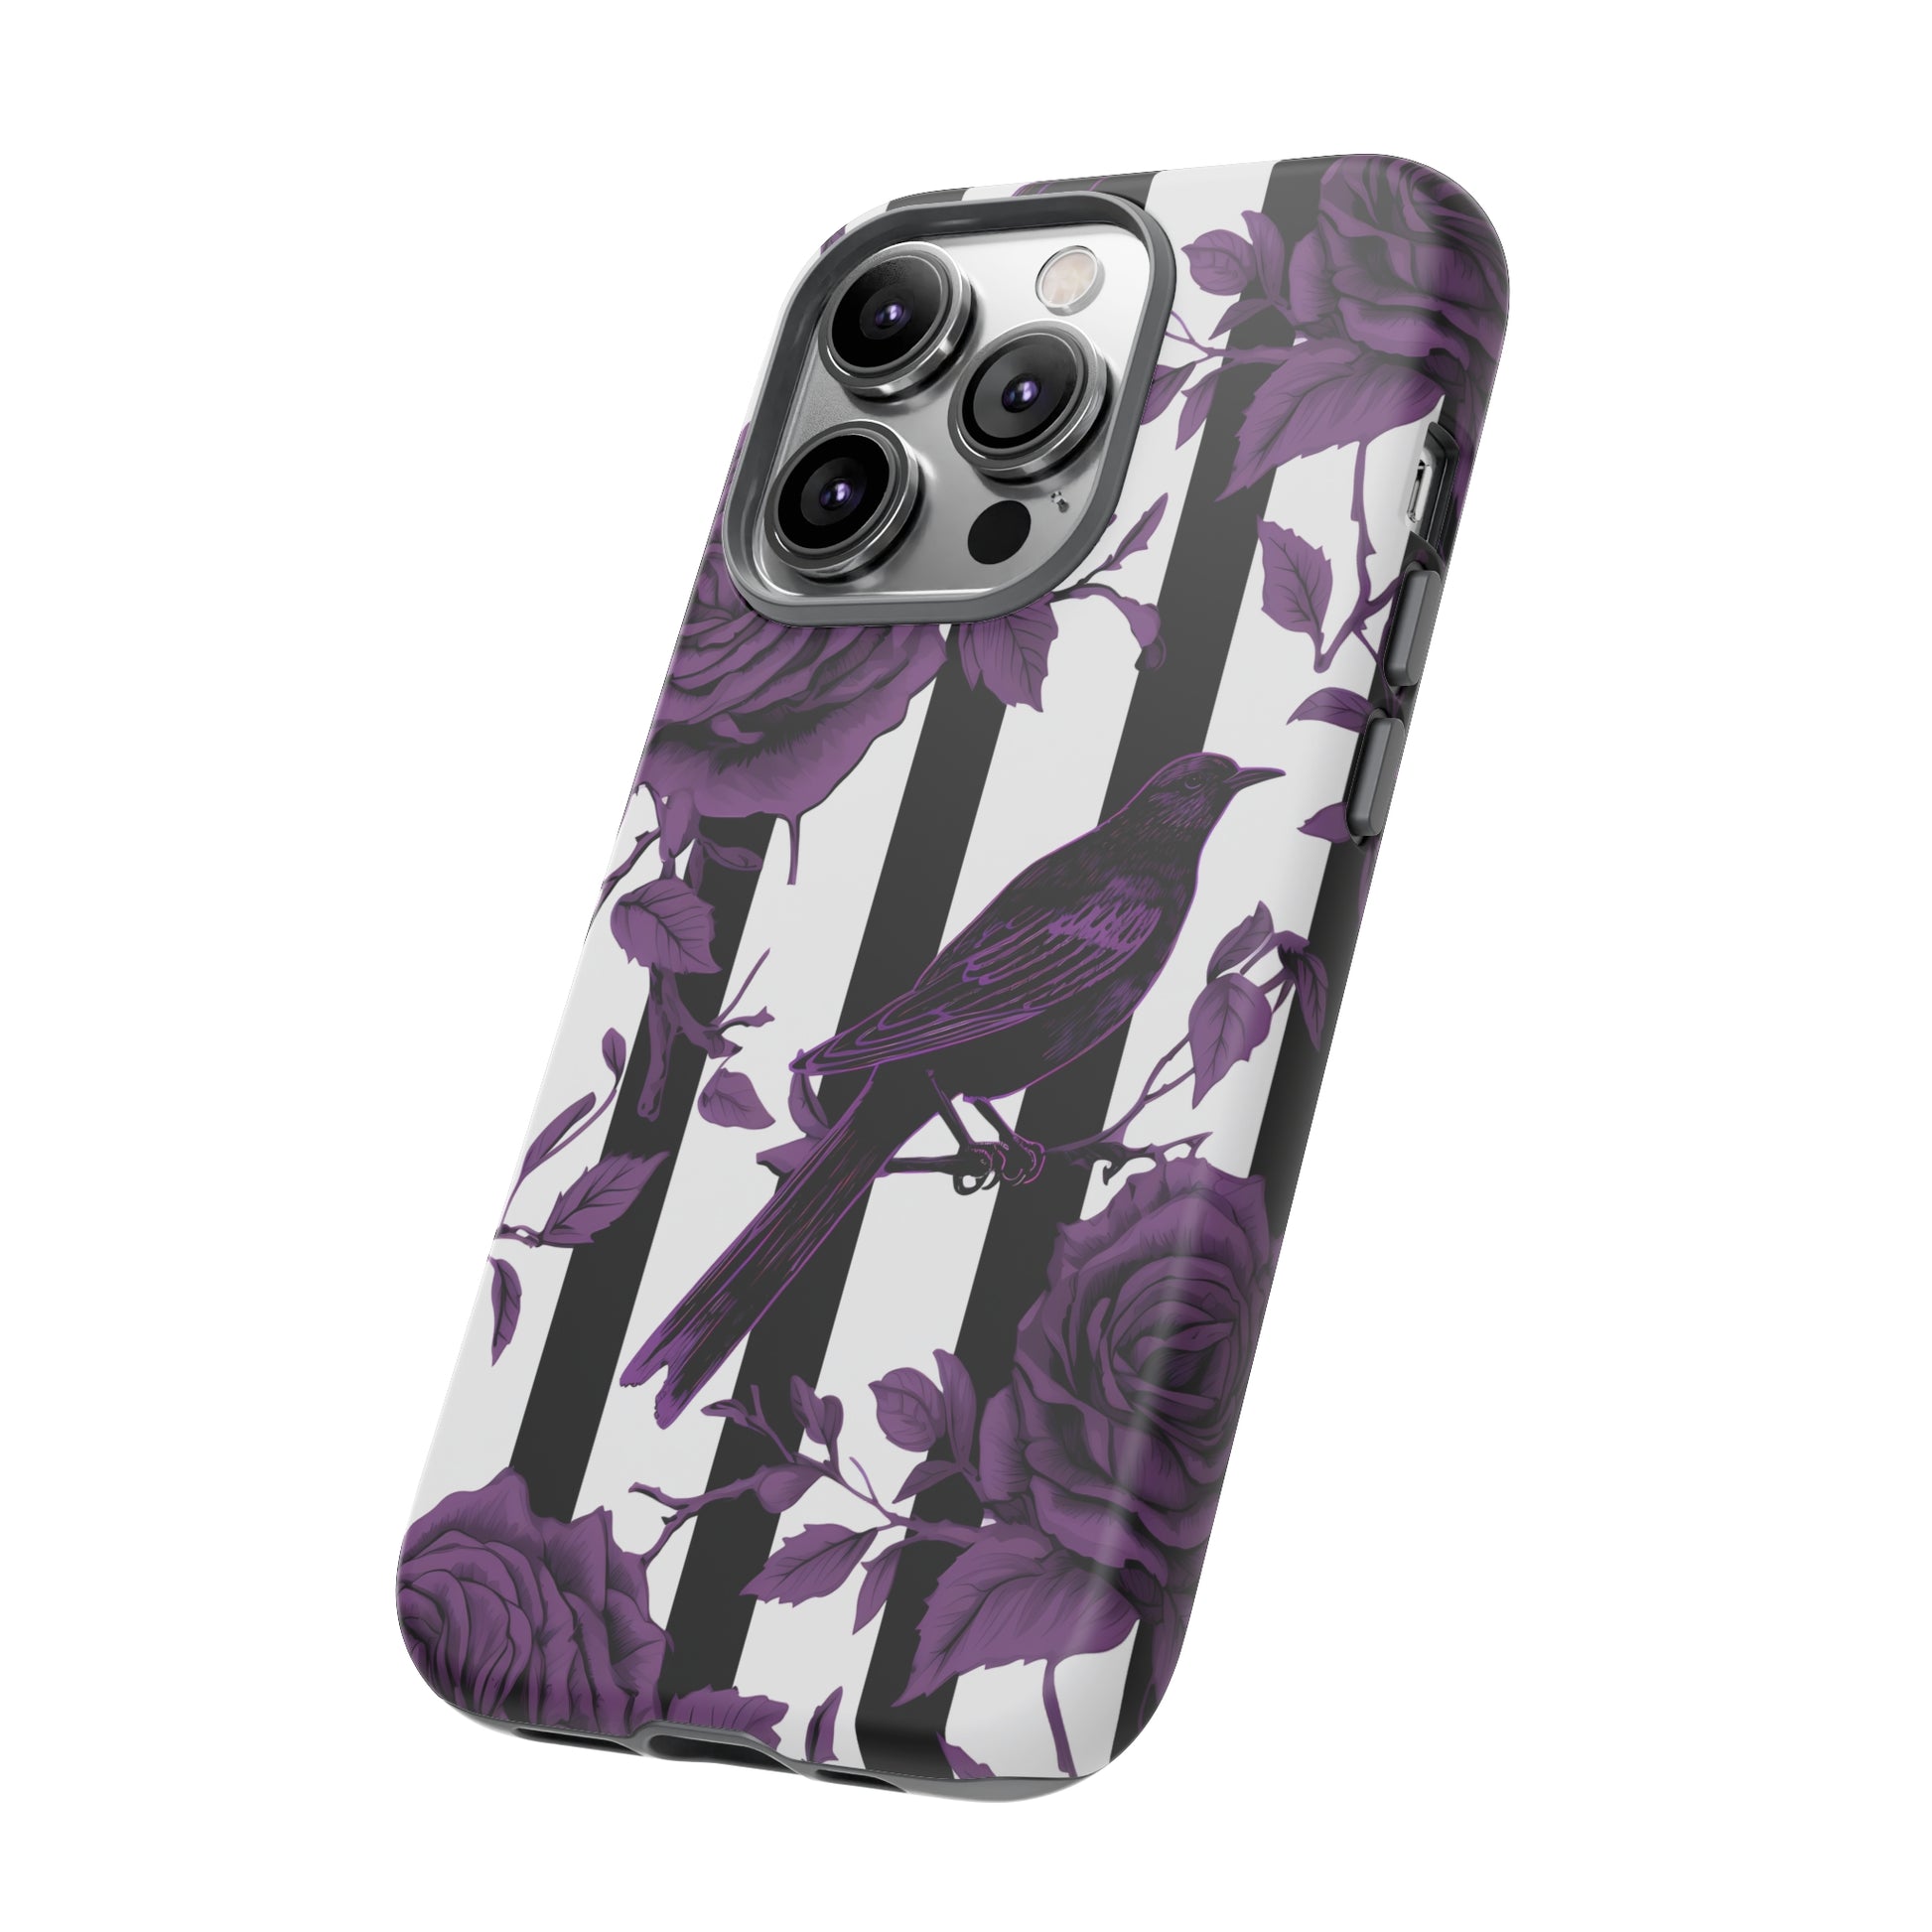 Striped Crows and Roses Tough Cases for iPhone Samsung Google PhonesPhone CaseVTZdesignsiPhone 13GlossyAccessoriescrowsGlossy